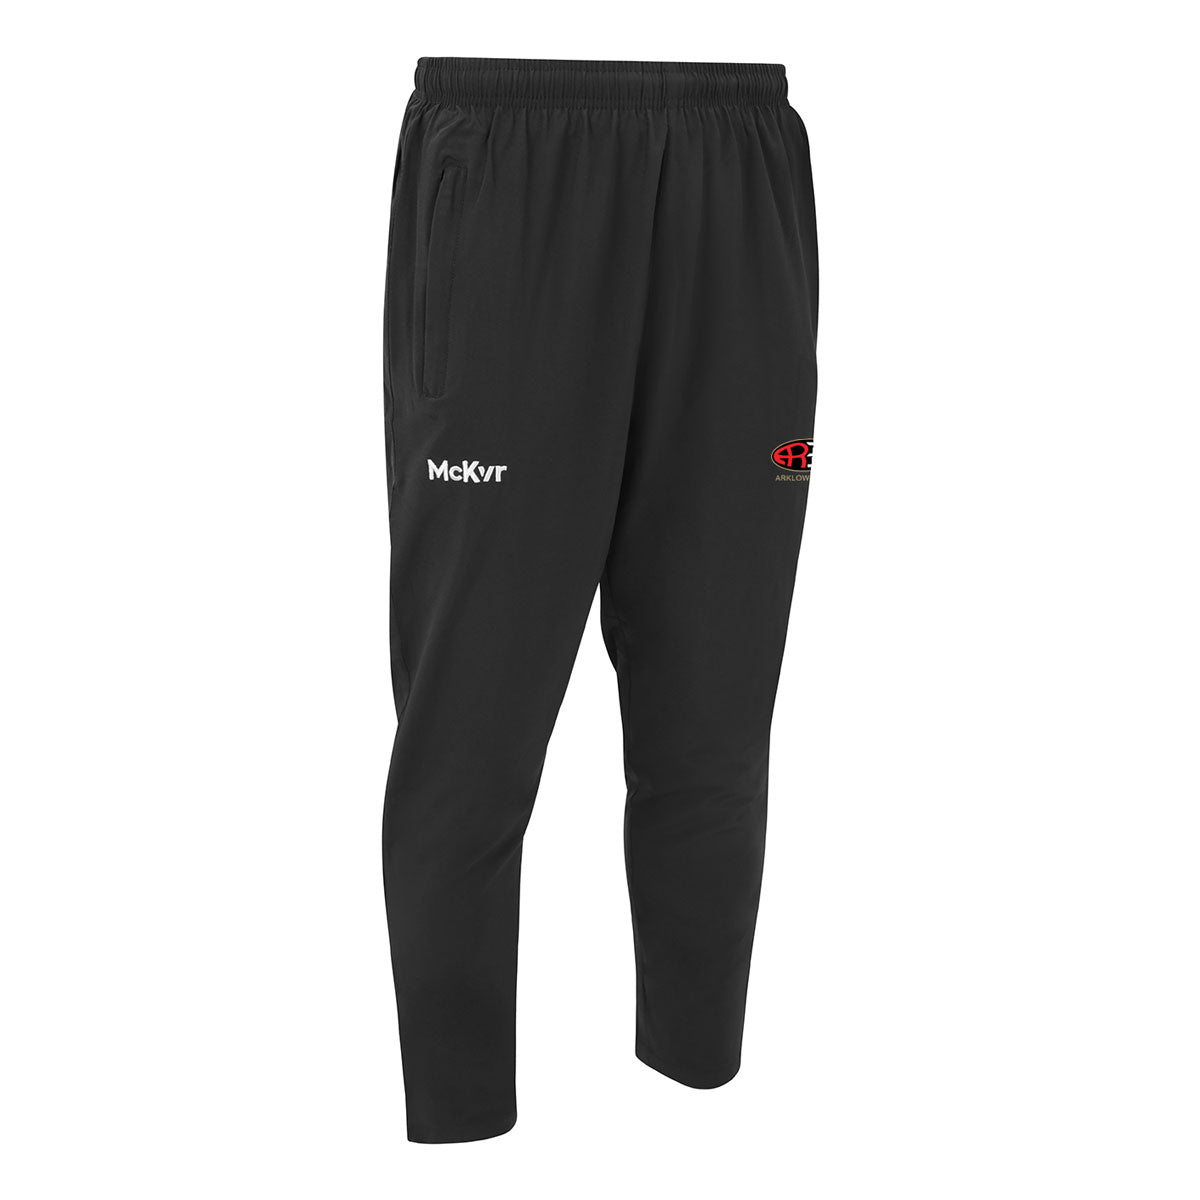 Mc Keever Arklow RFC Core 22 Tapered Pants - Youth - Black